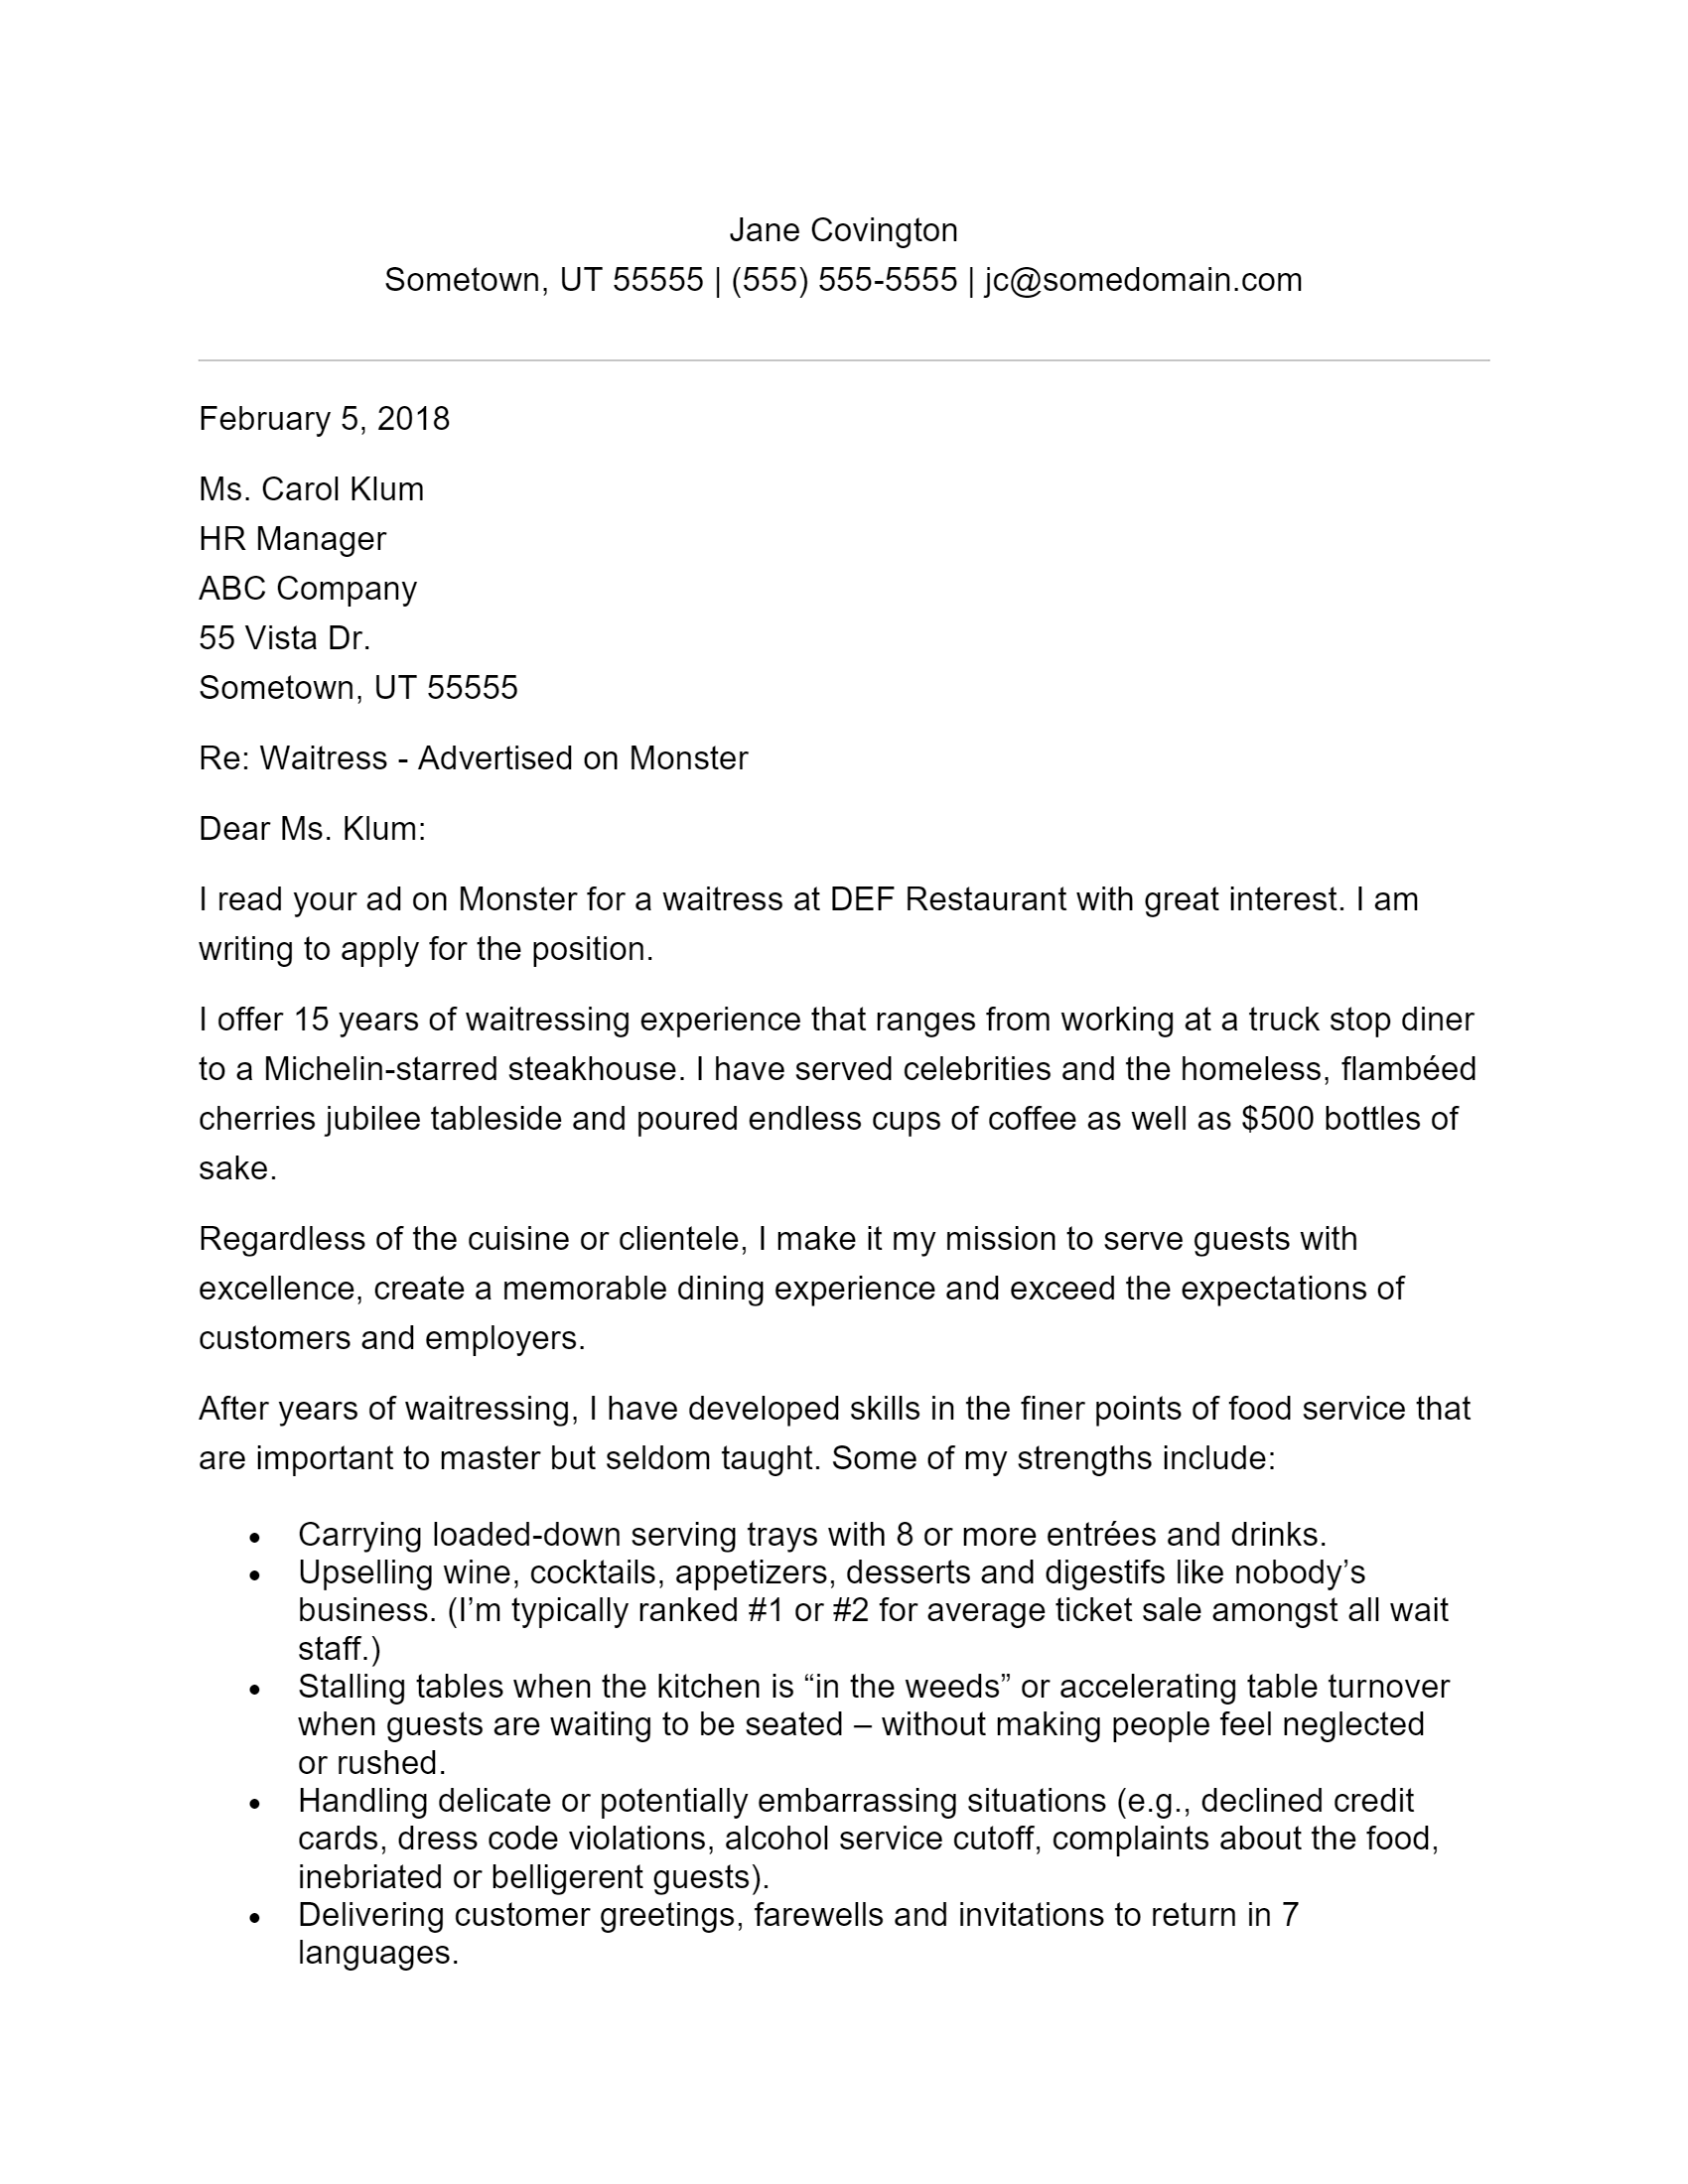 Free Waitress Cover Letter Template Example On ResumeThatWorks